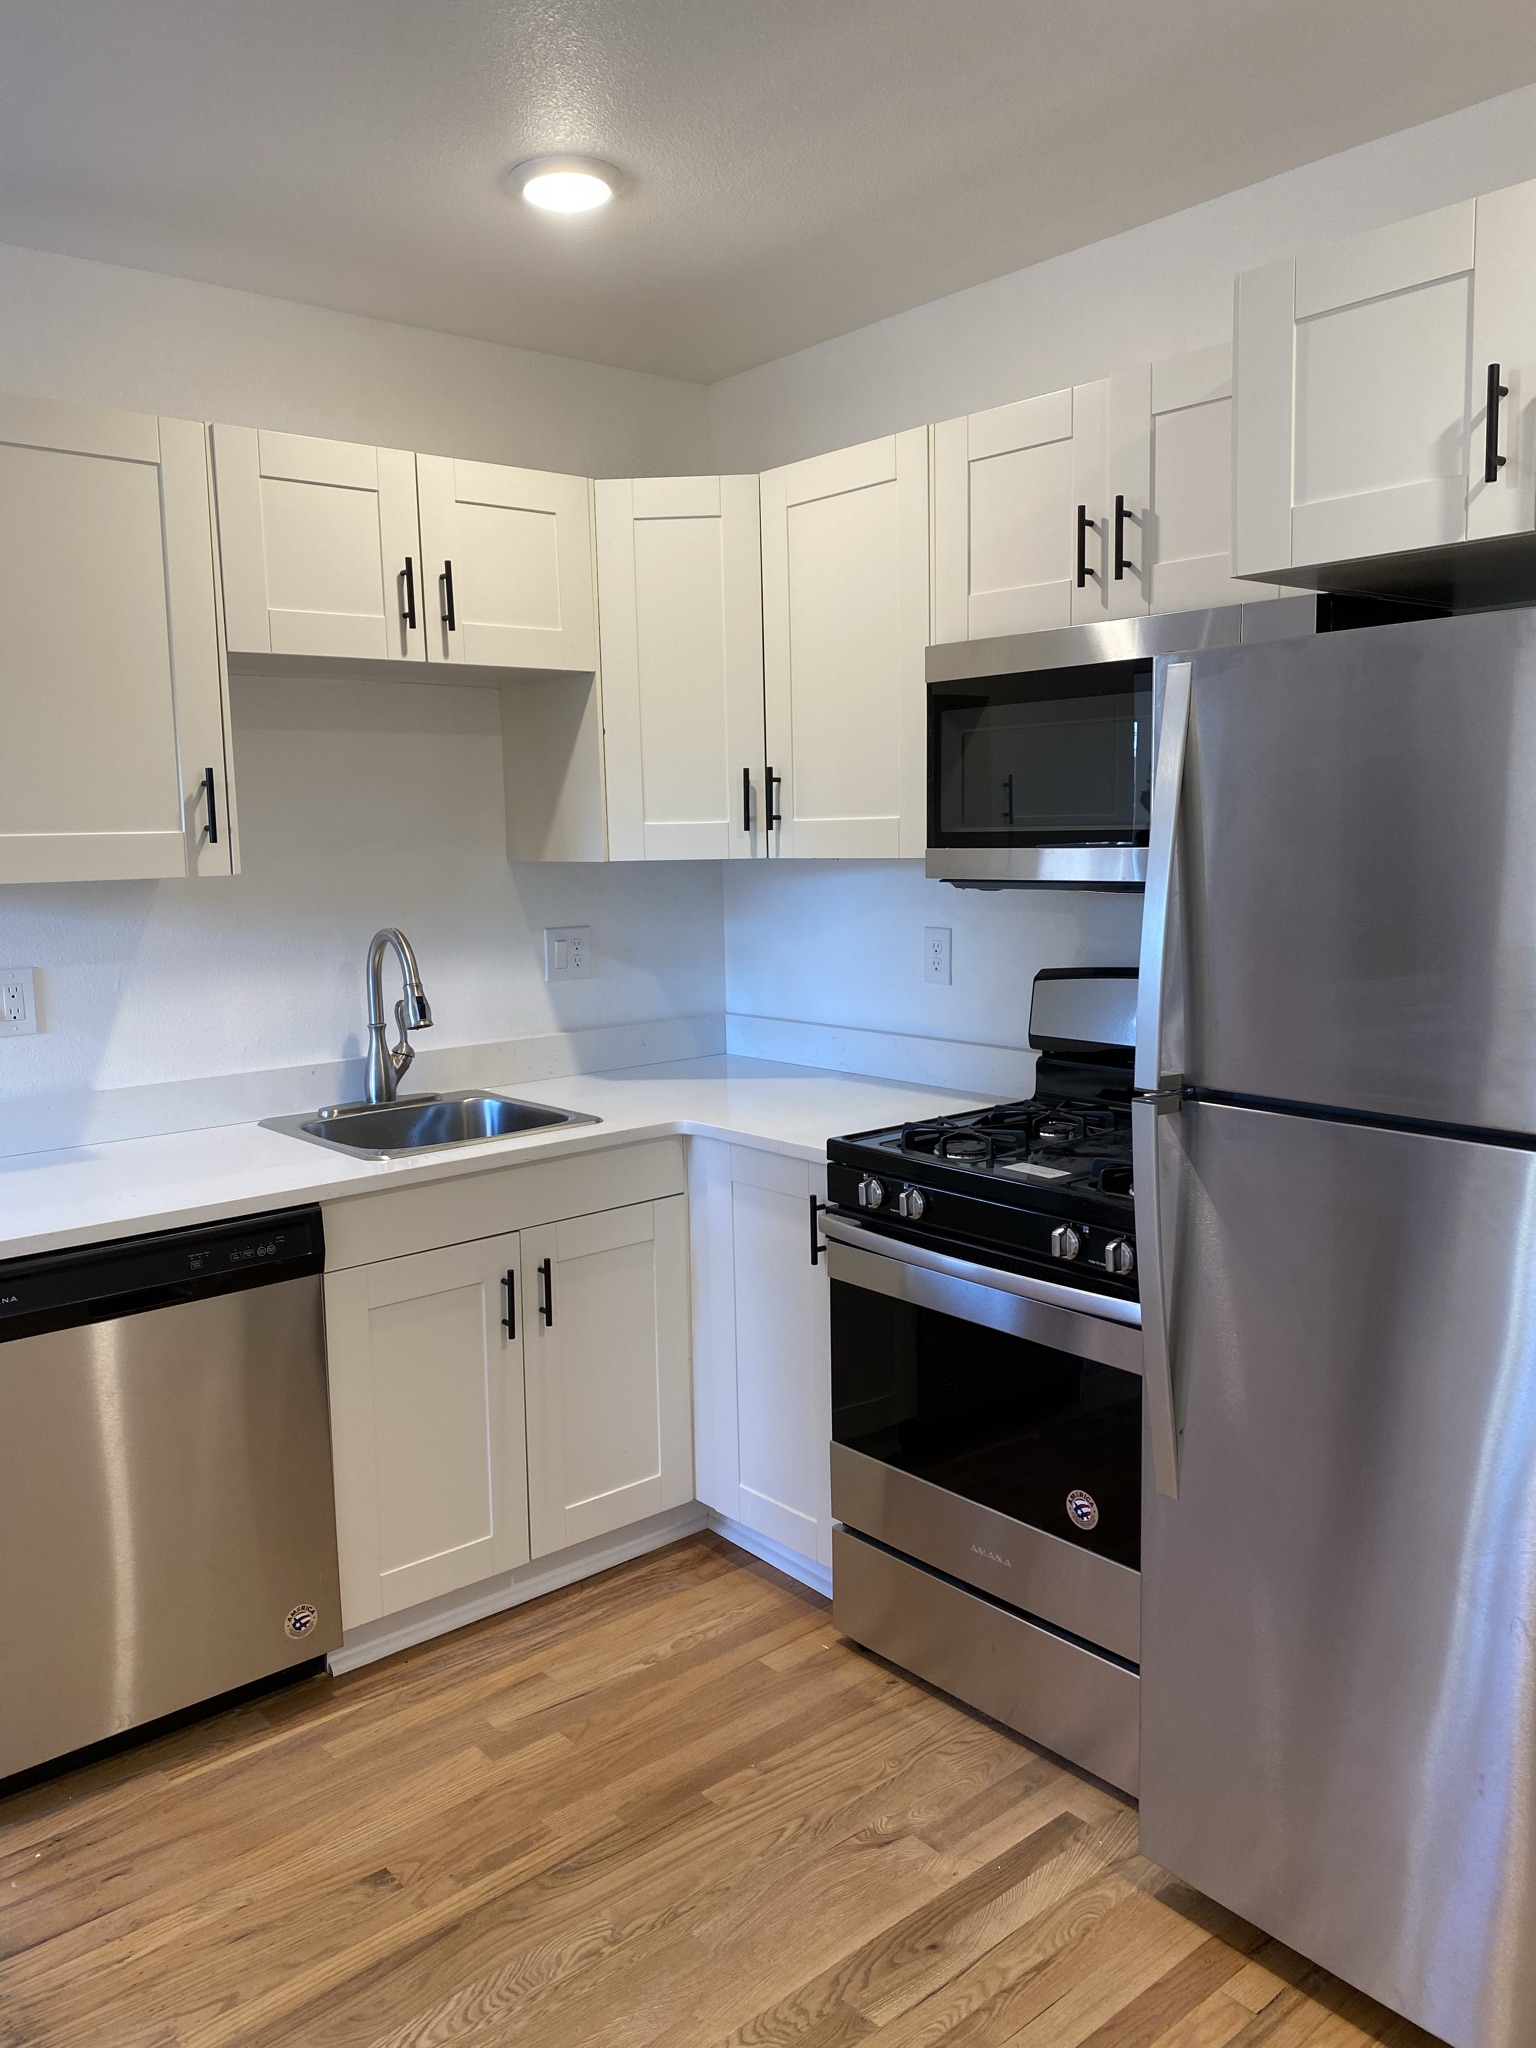 Updated kitchen in The Flats at Highland Park